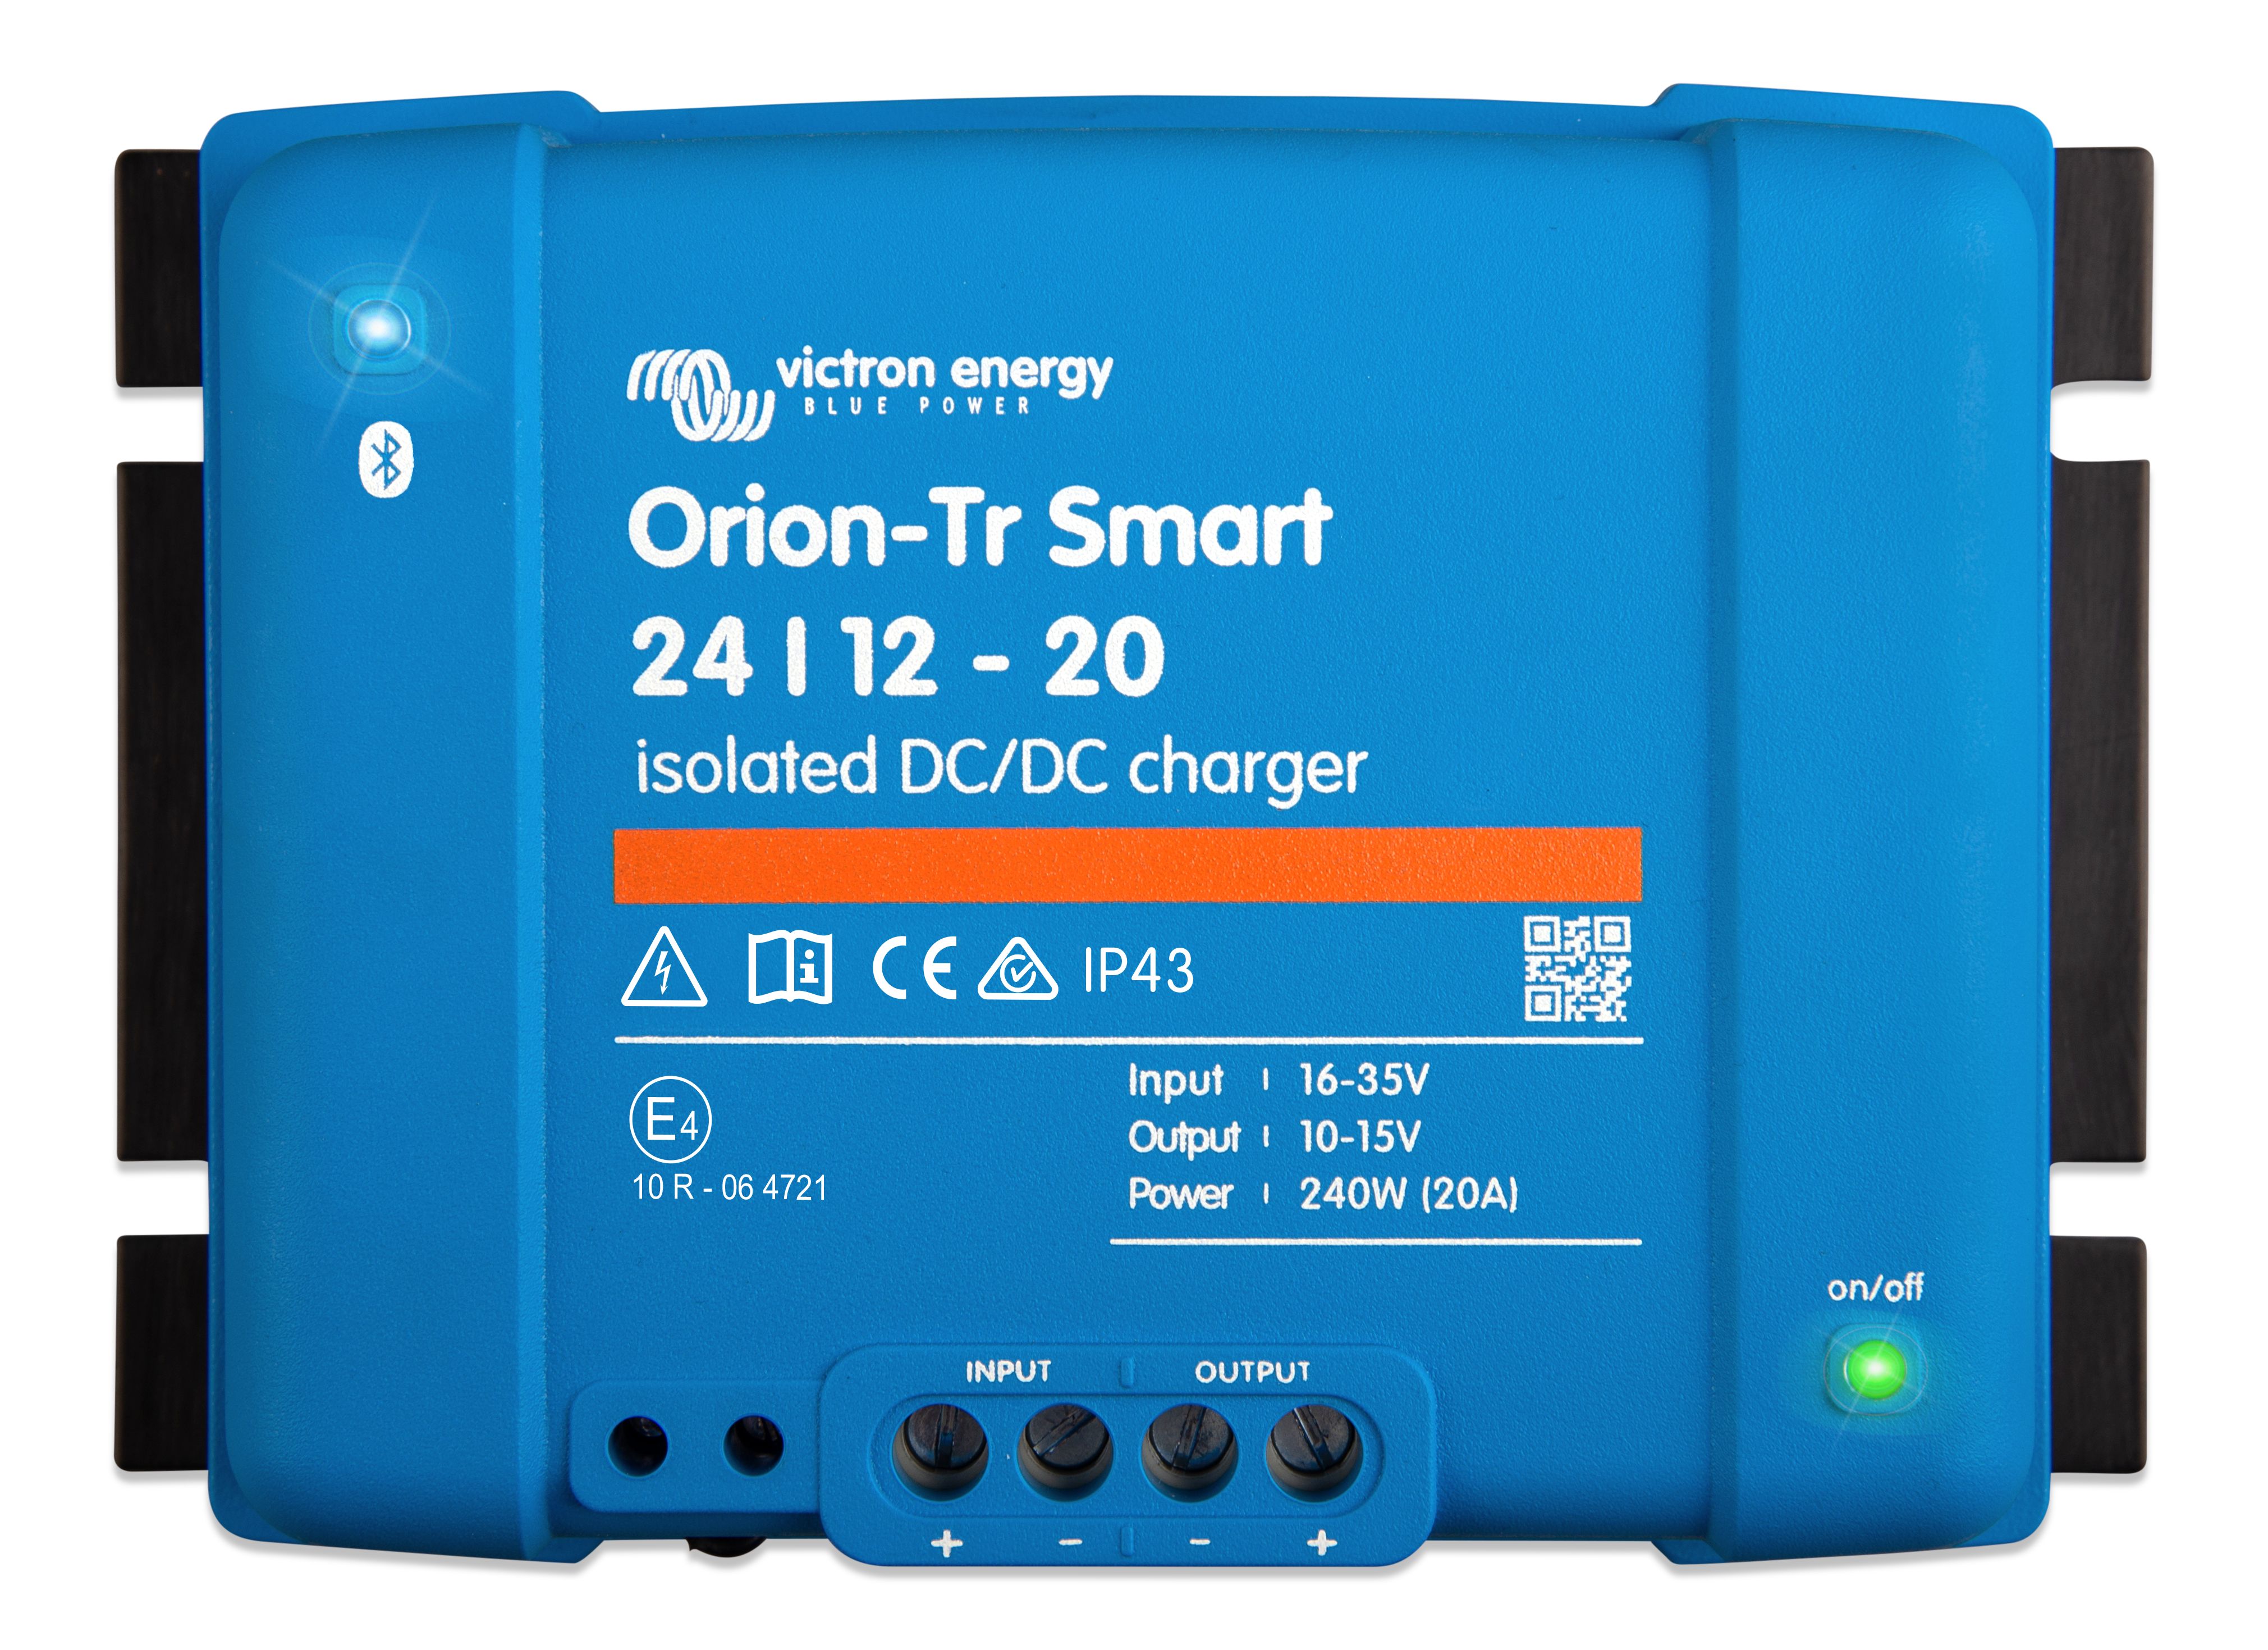 Orion-Tr Smart DC-DC Ladebooster isoliert - Victron Energy